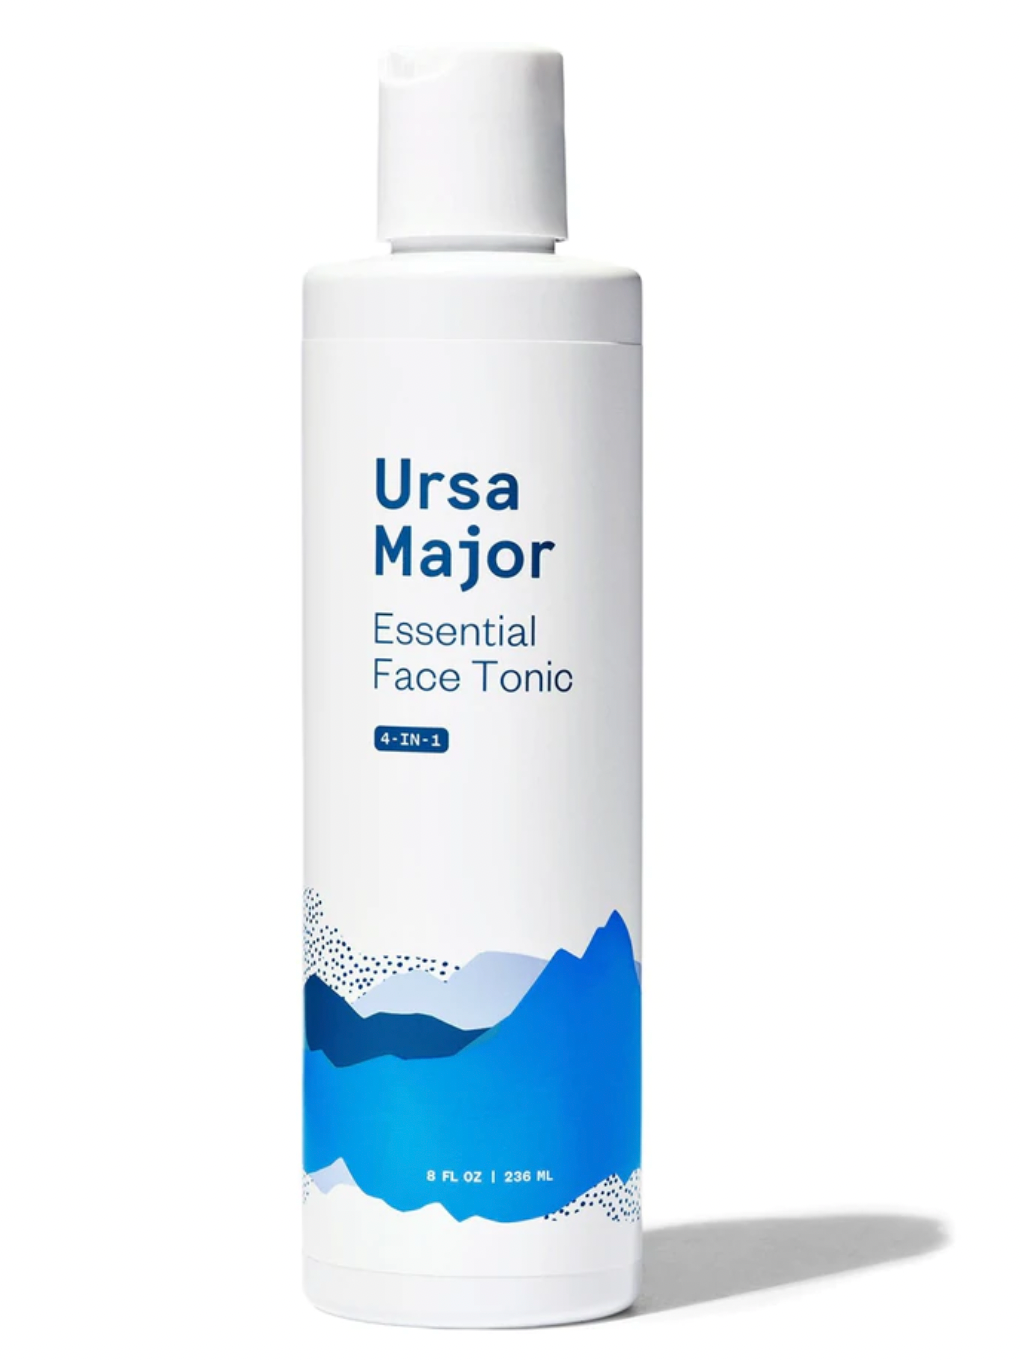 4-in-1 Essential Face Tonic